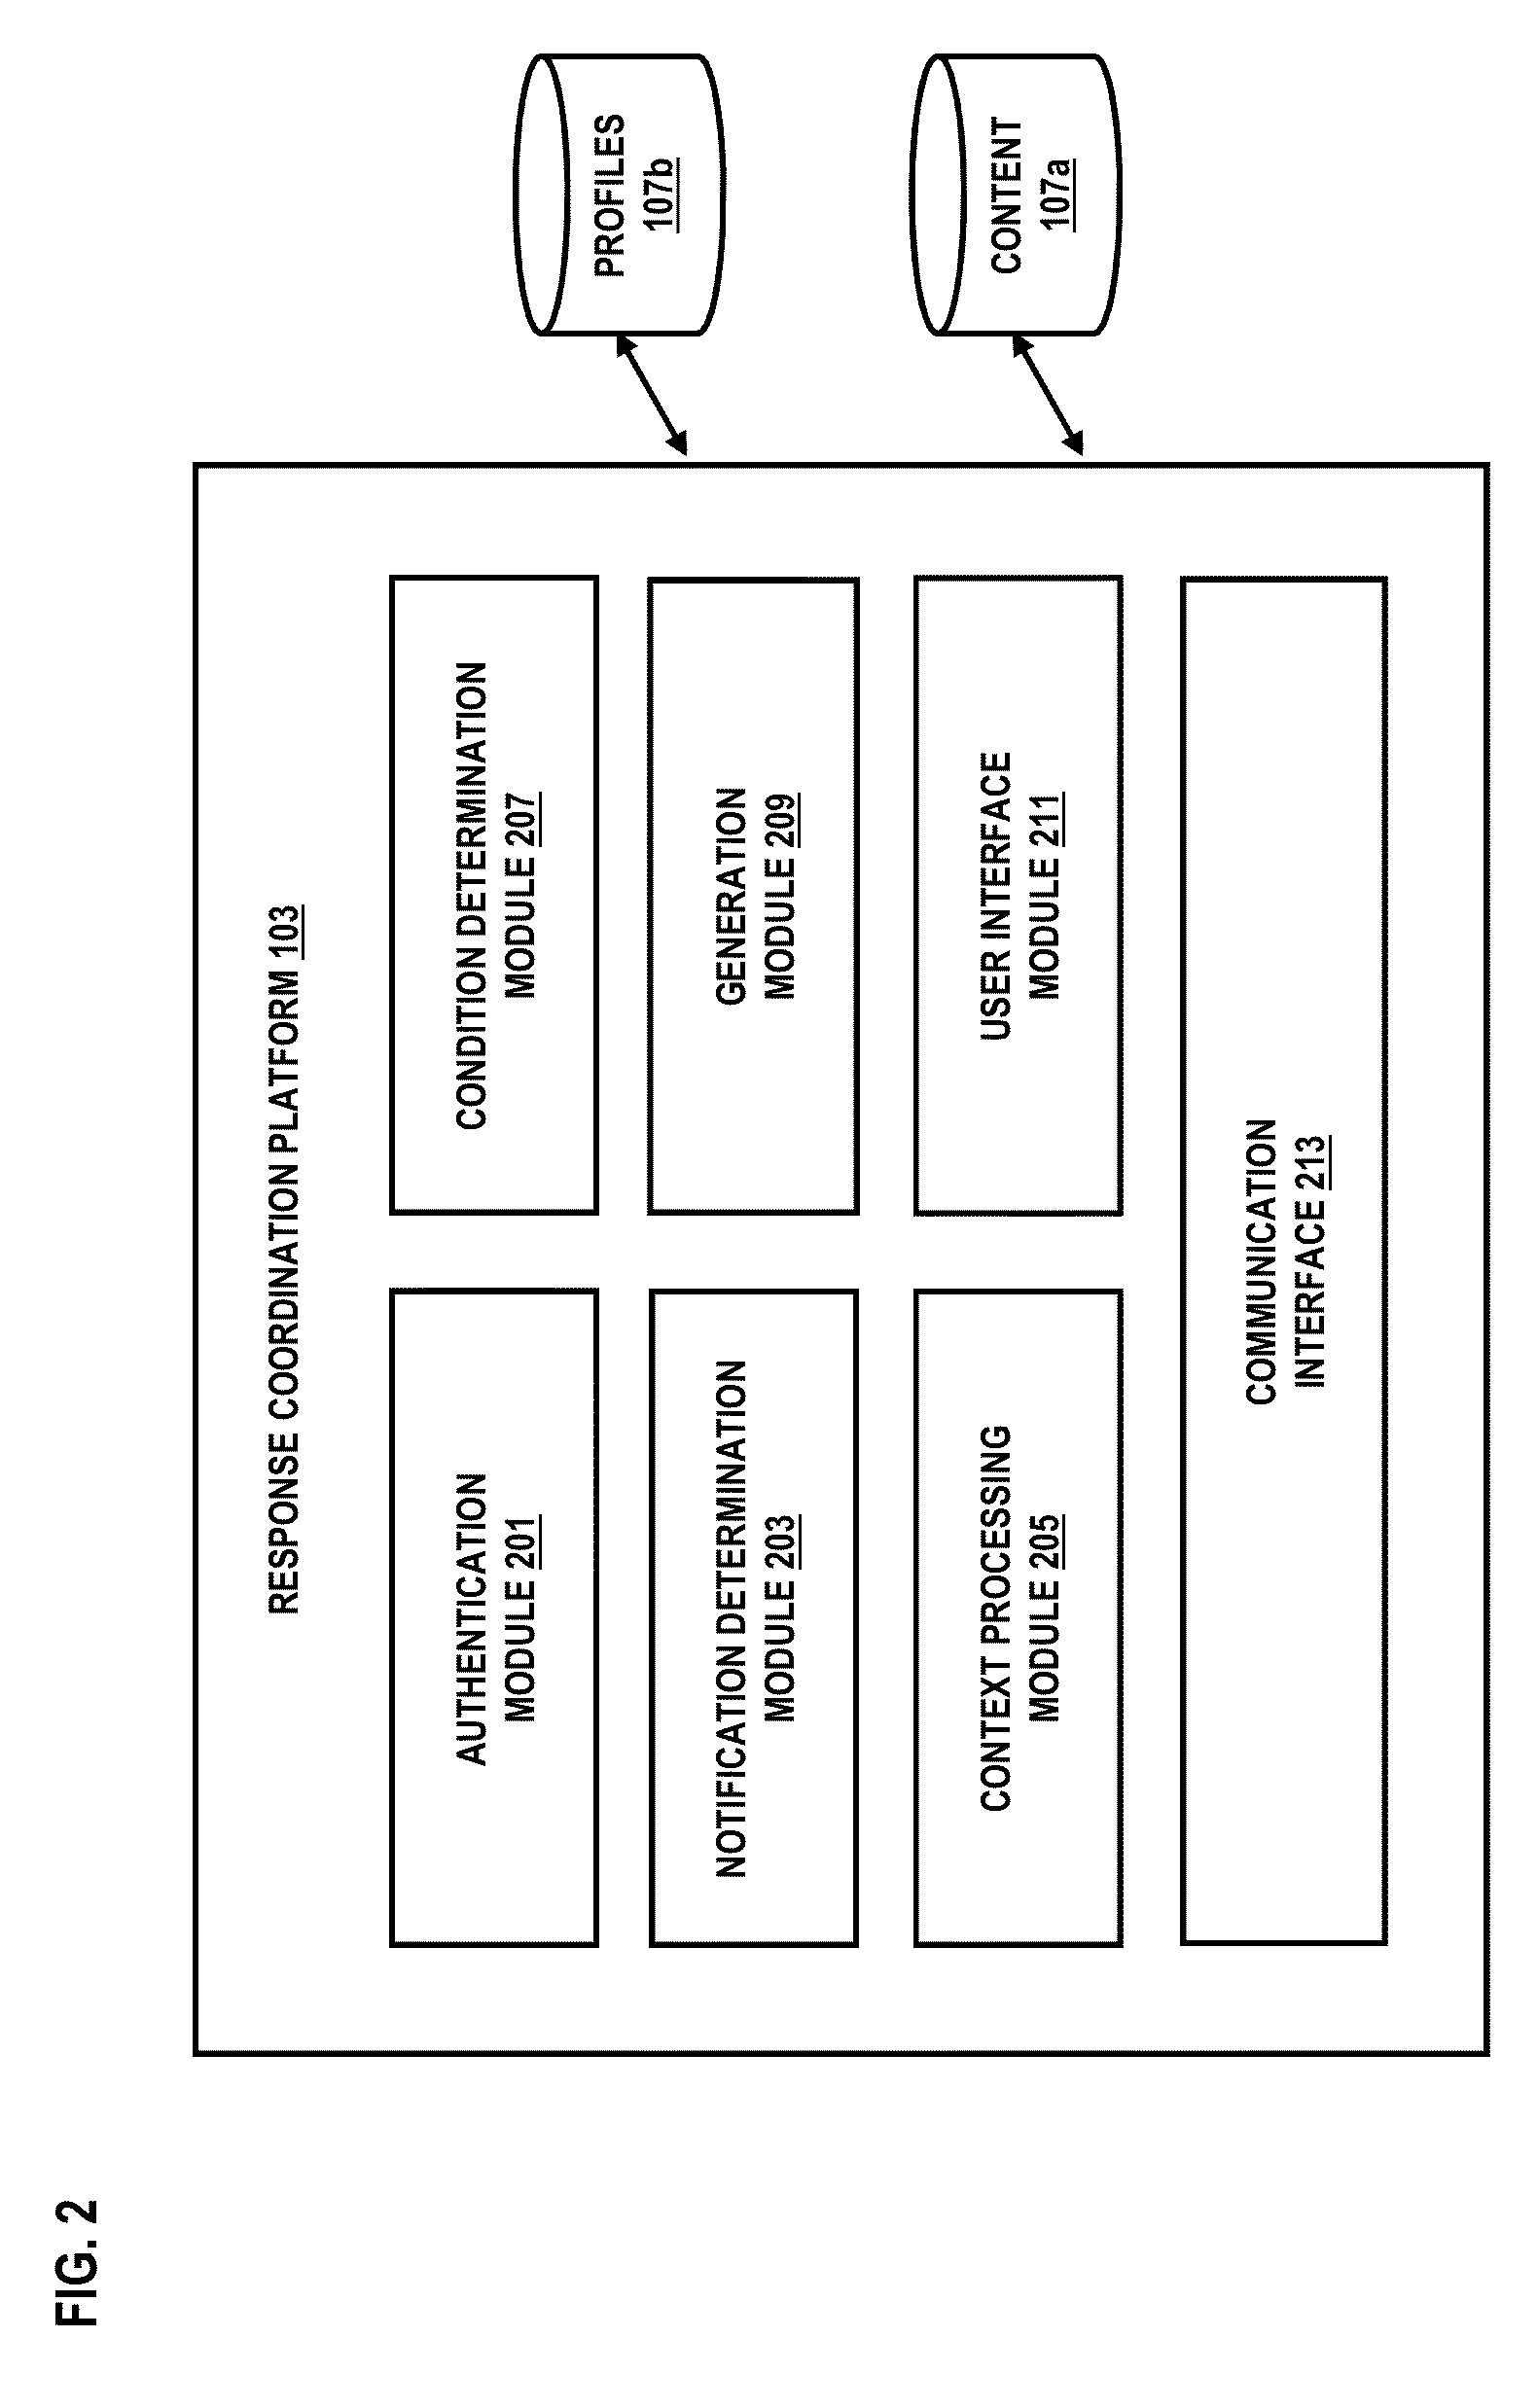 Method and system for coordinating a communication response